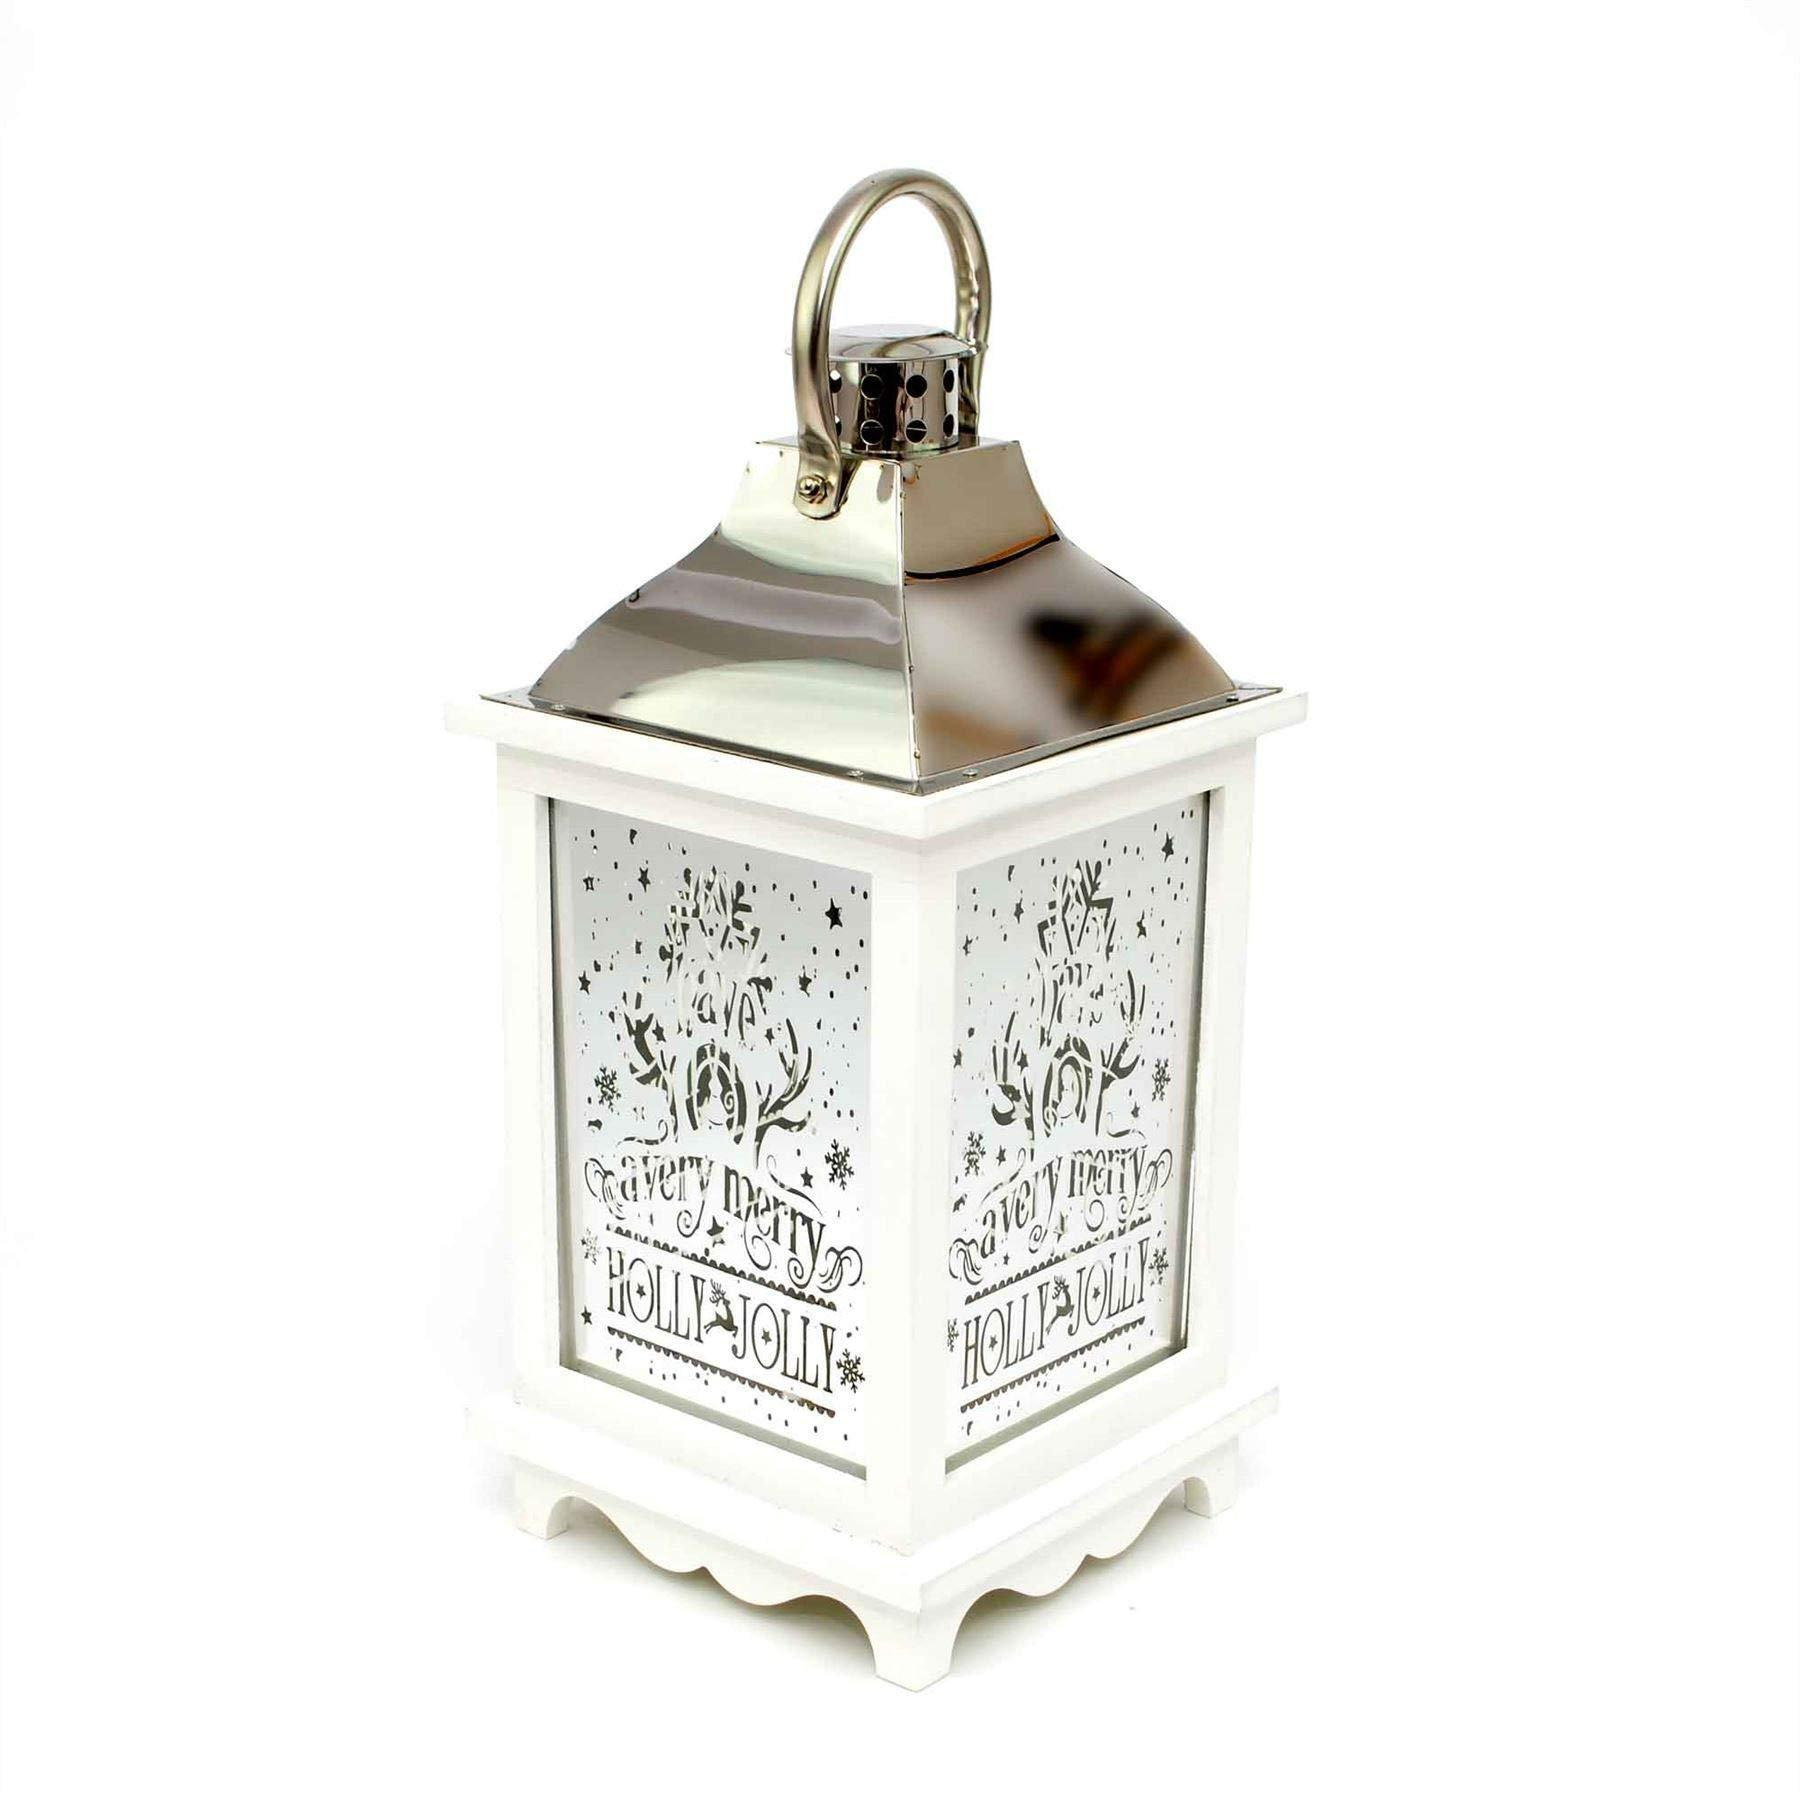 Christmas Lantern Wooden White Stainless Steel Warm LED Light Xmas Home Decorations - image 1